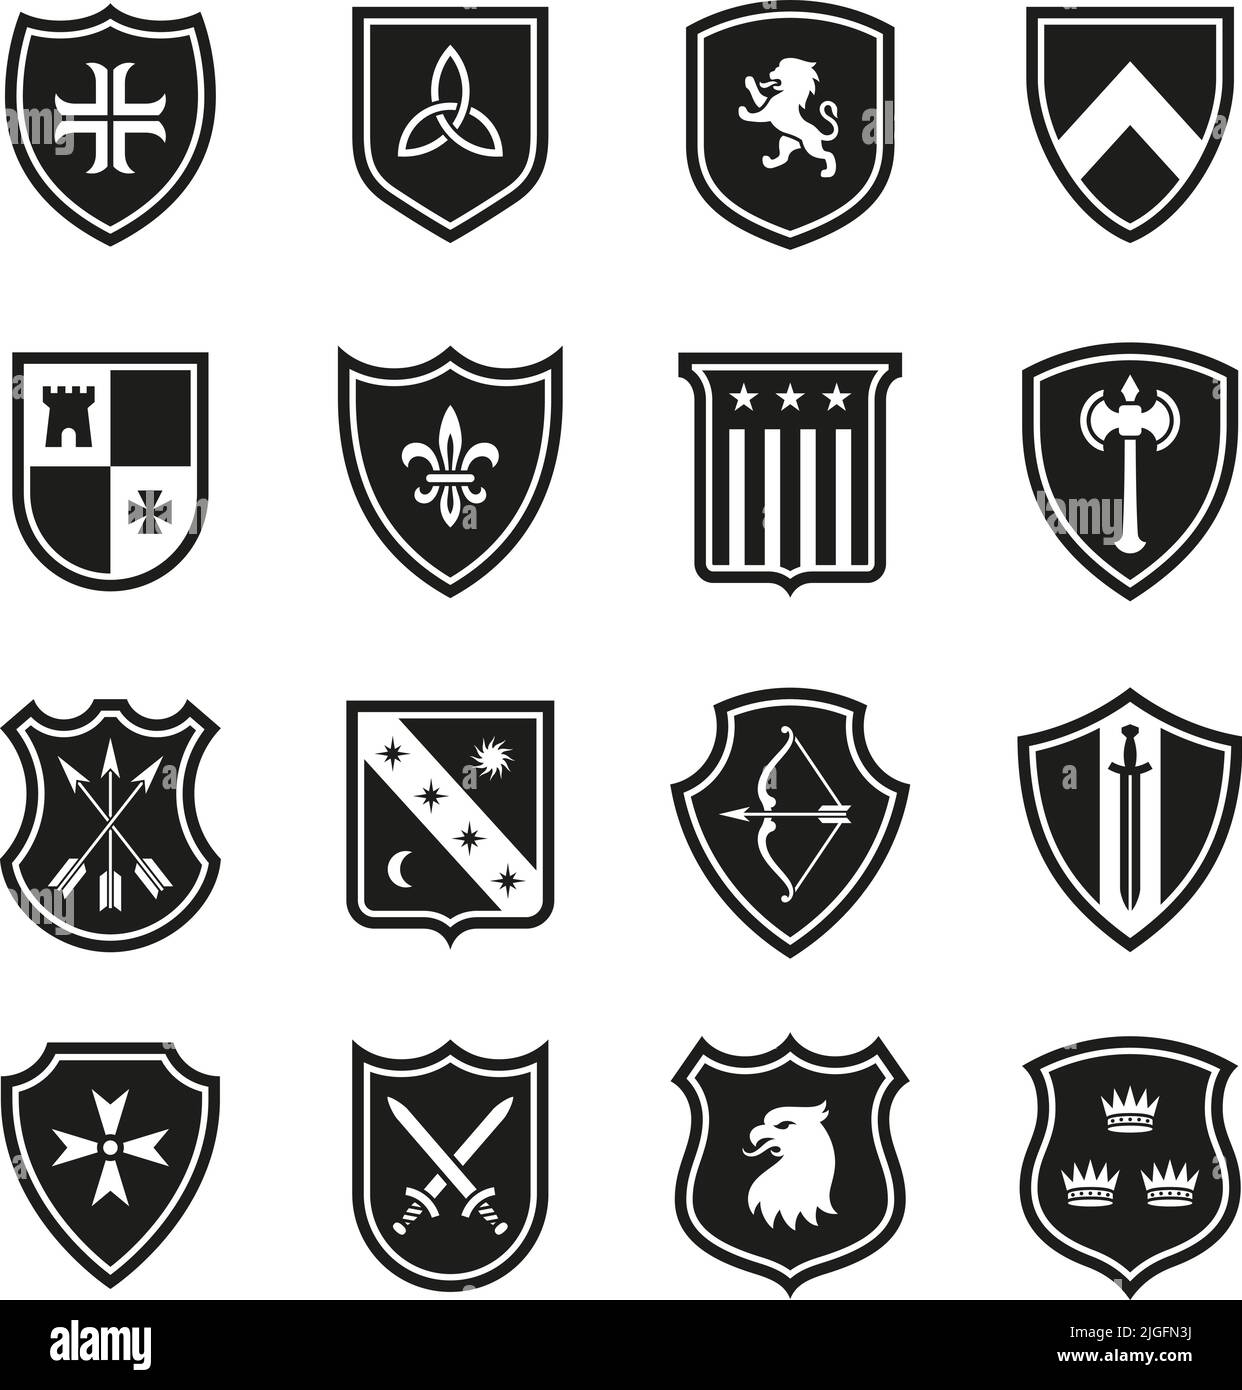 Heraldic shields icons. Protection icon, shield safeguarding of honor. Antivirus sign, various shielding badges of army, firewall, protect tidy vector Stock Vector